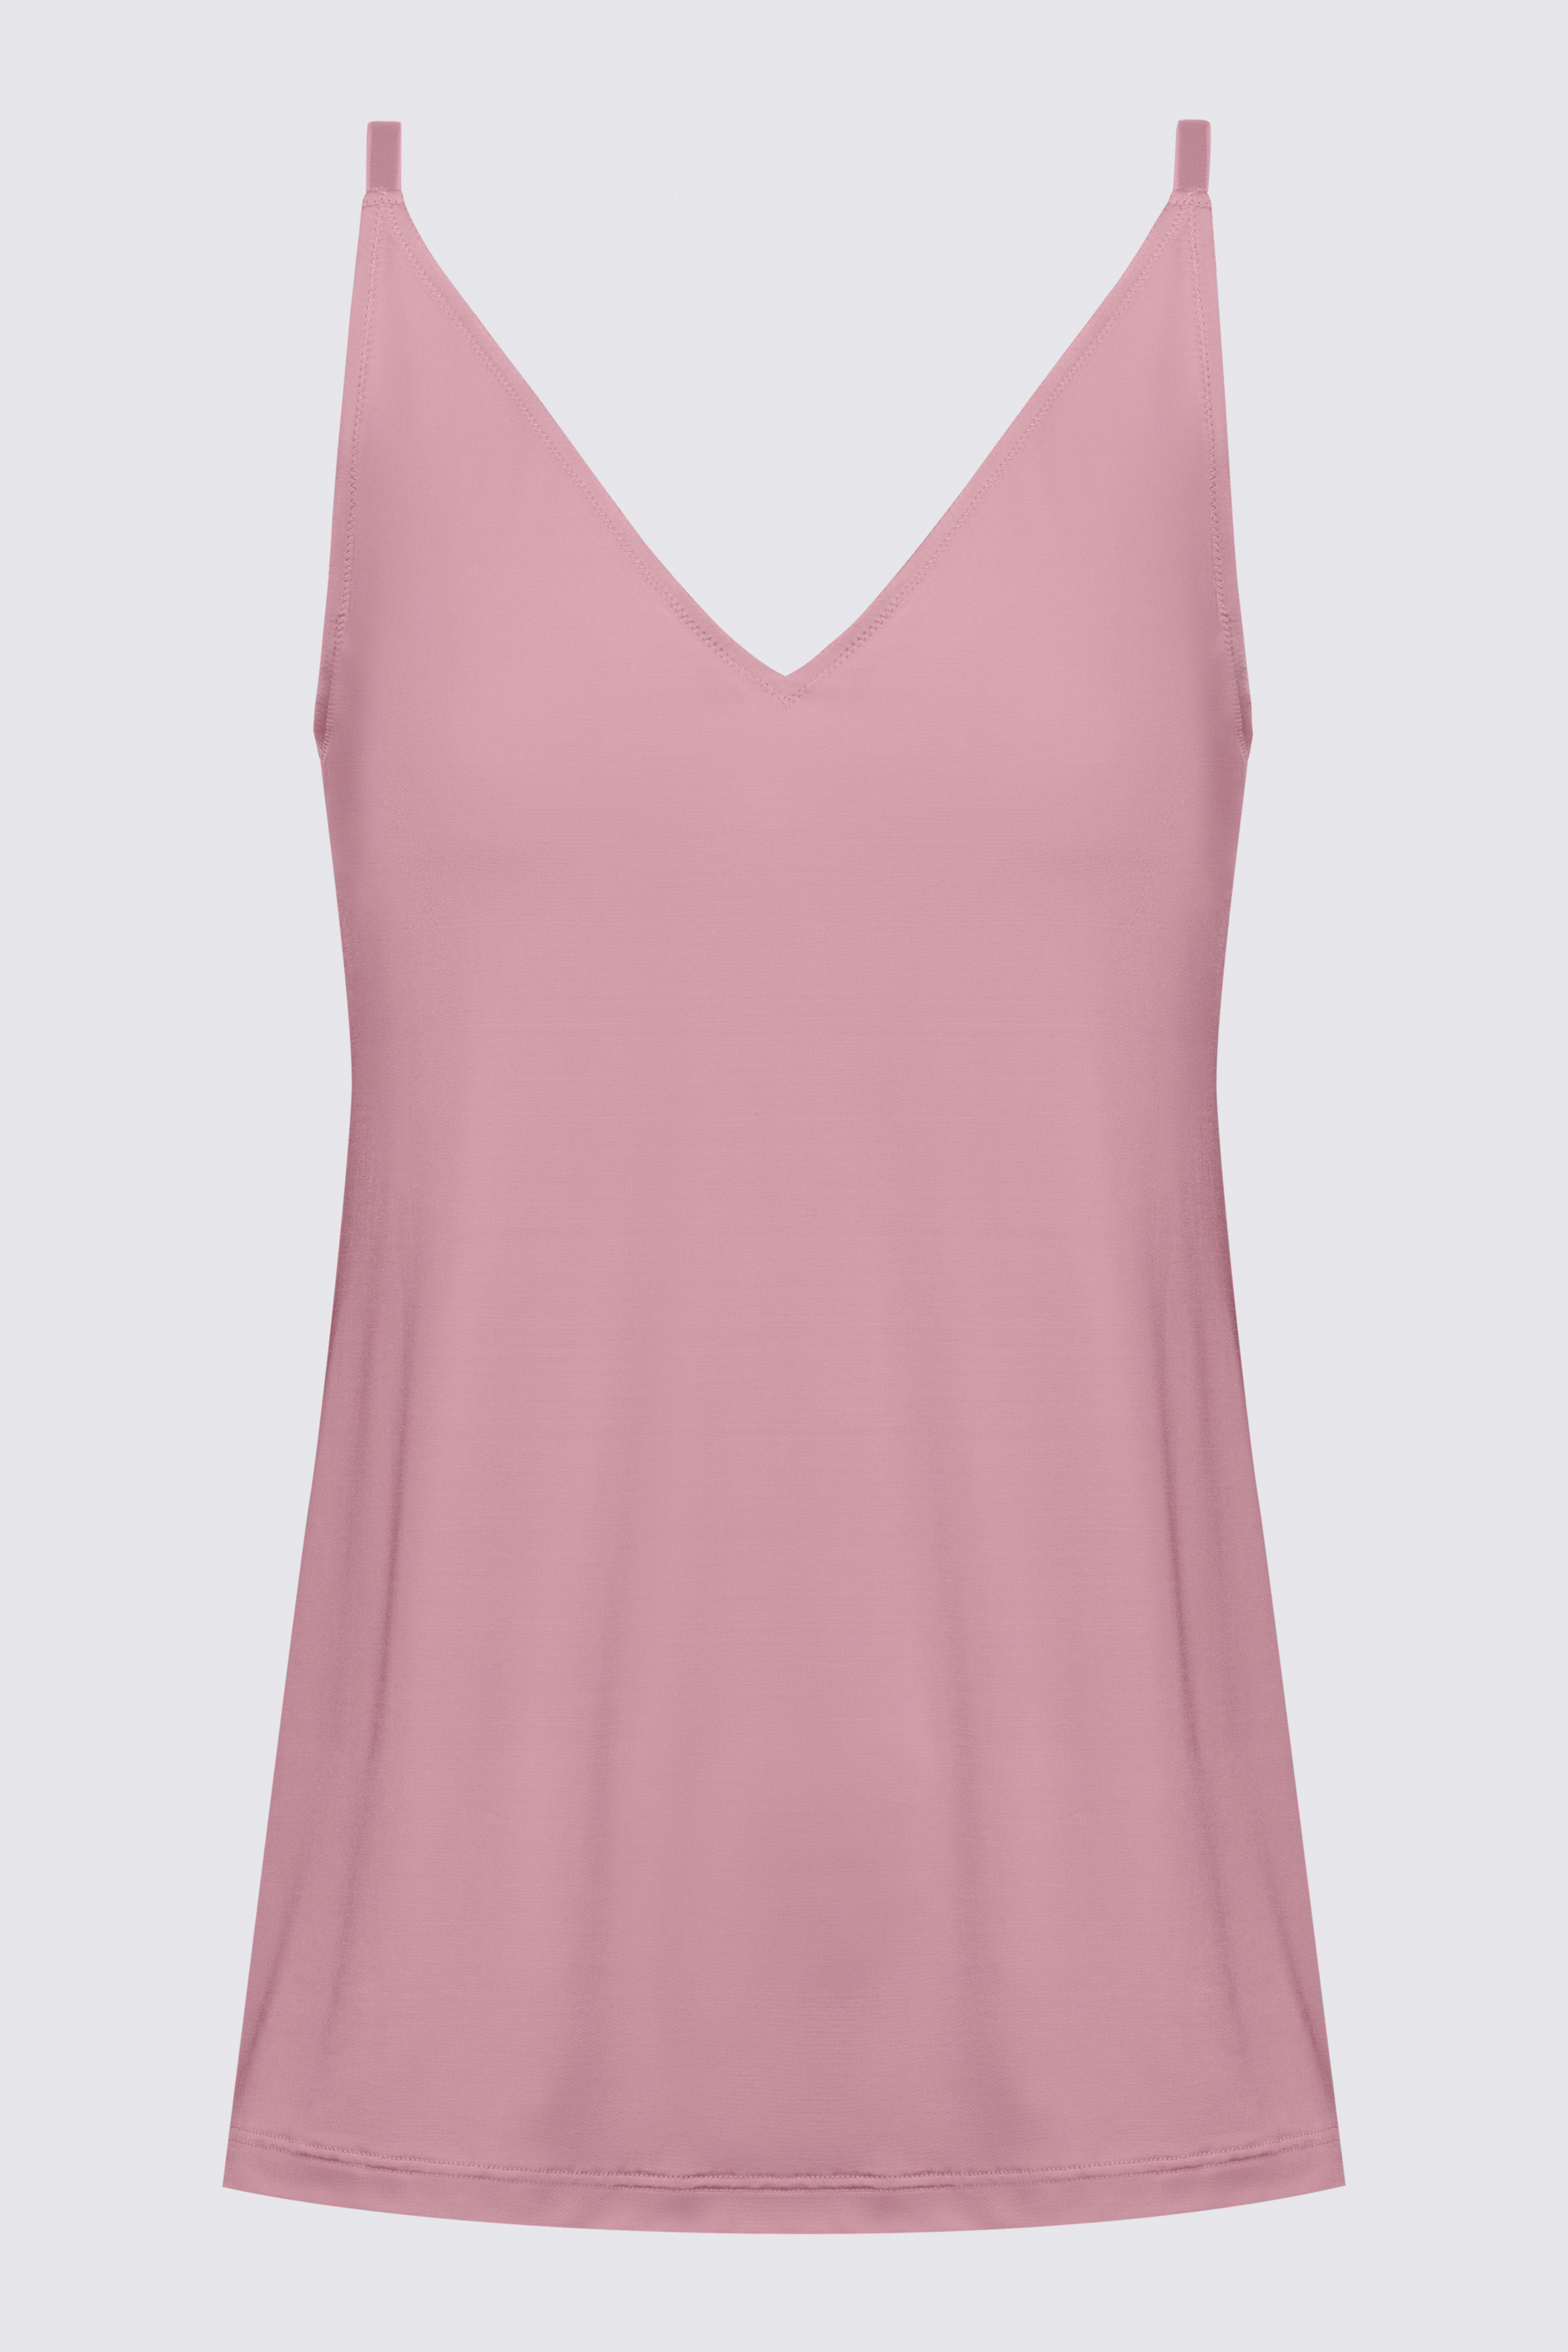 Camisole Serie Poetry Classy Uitknippen | mey®